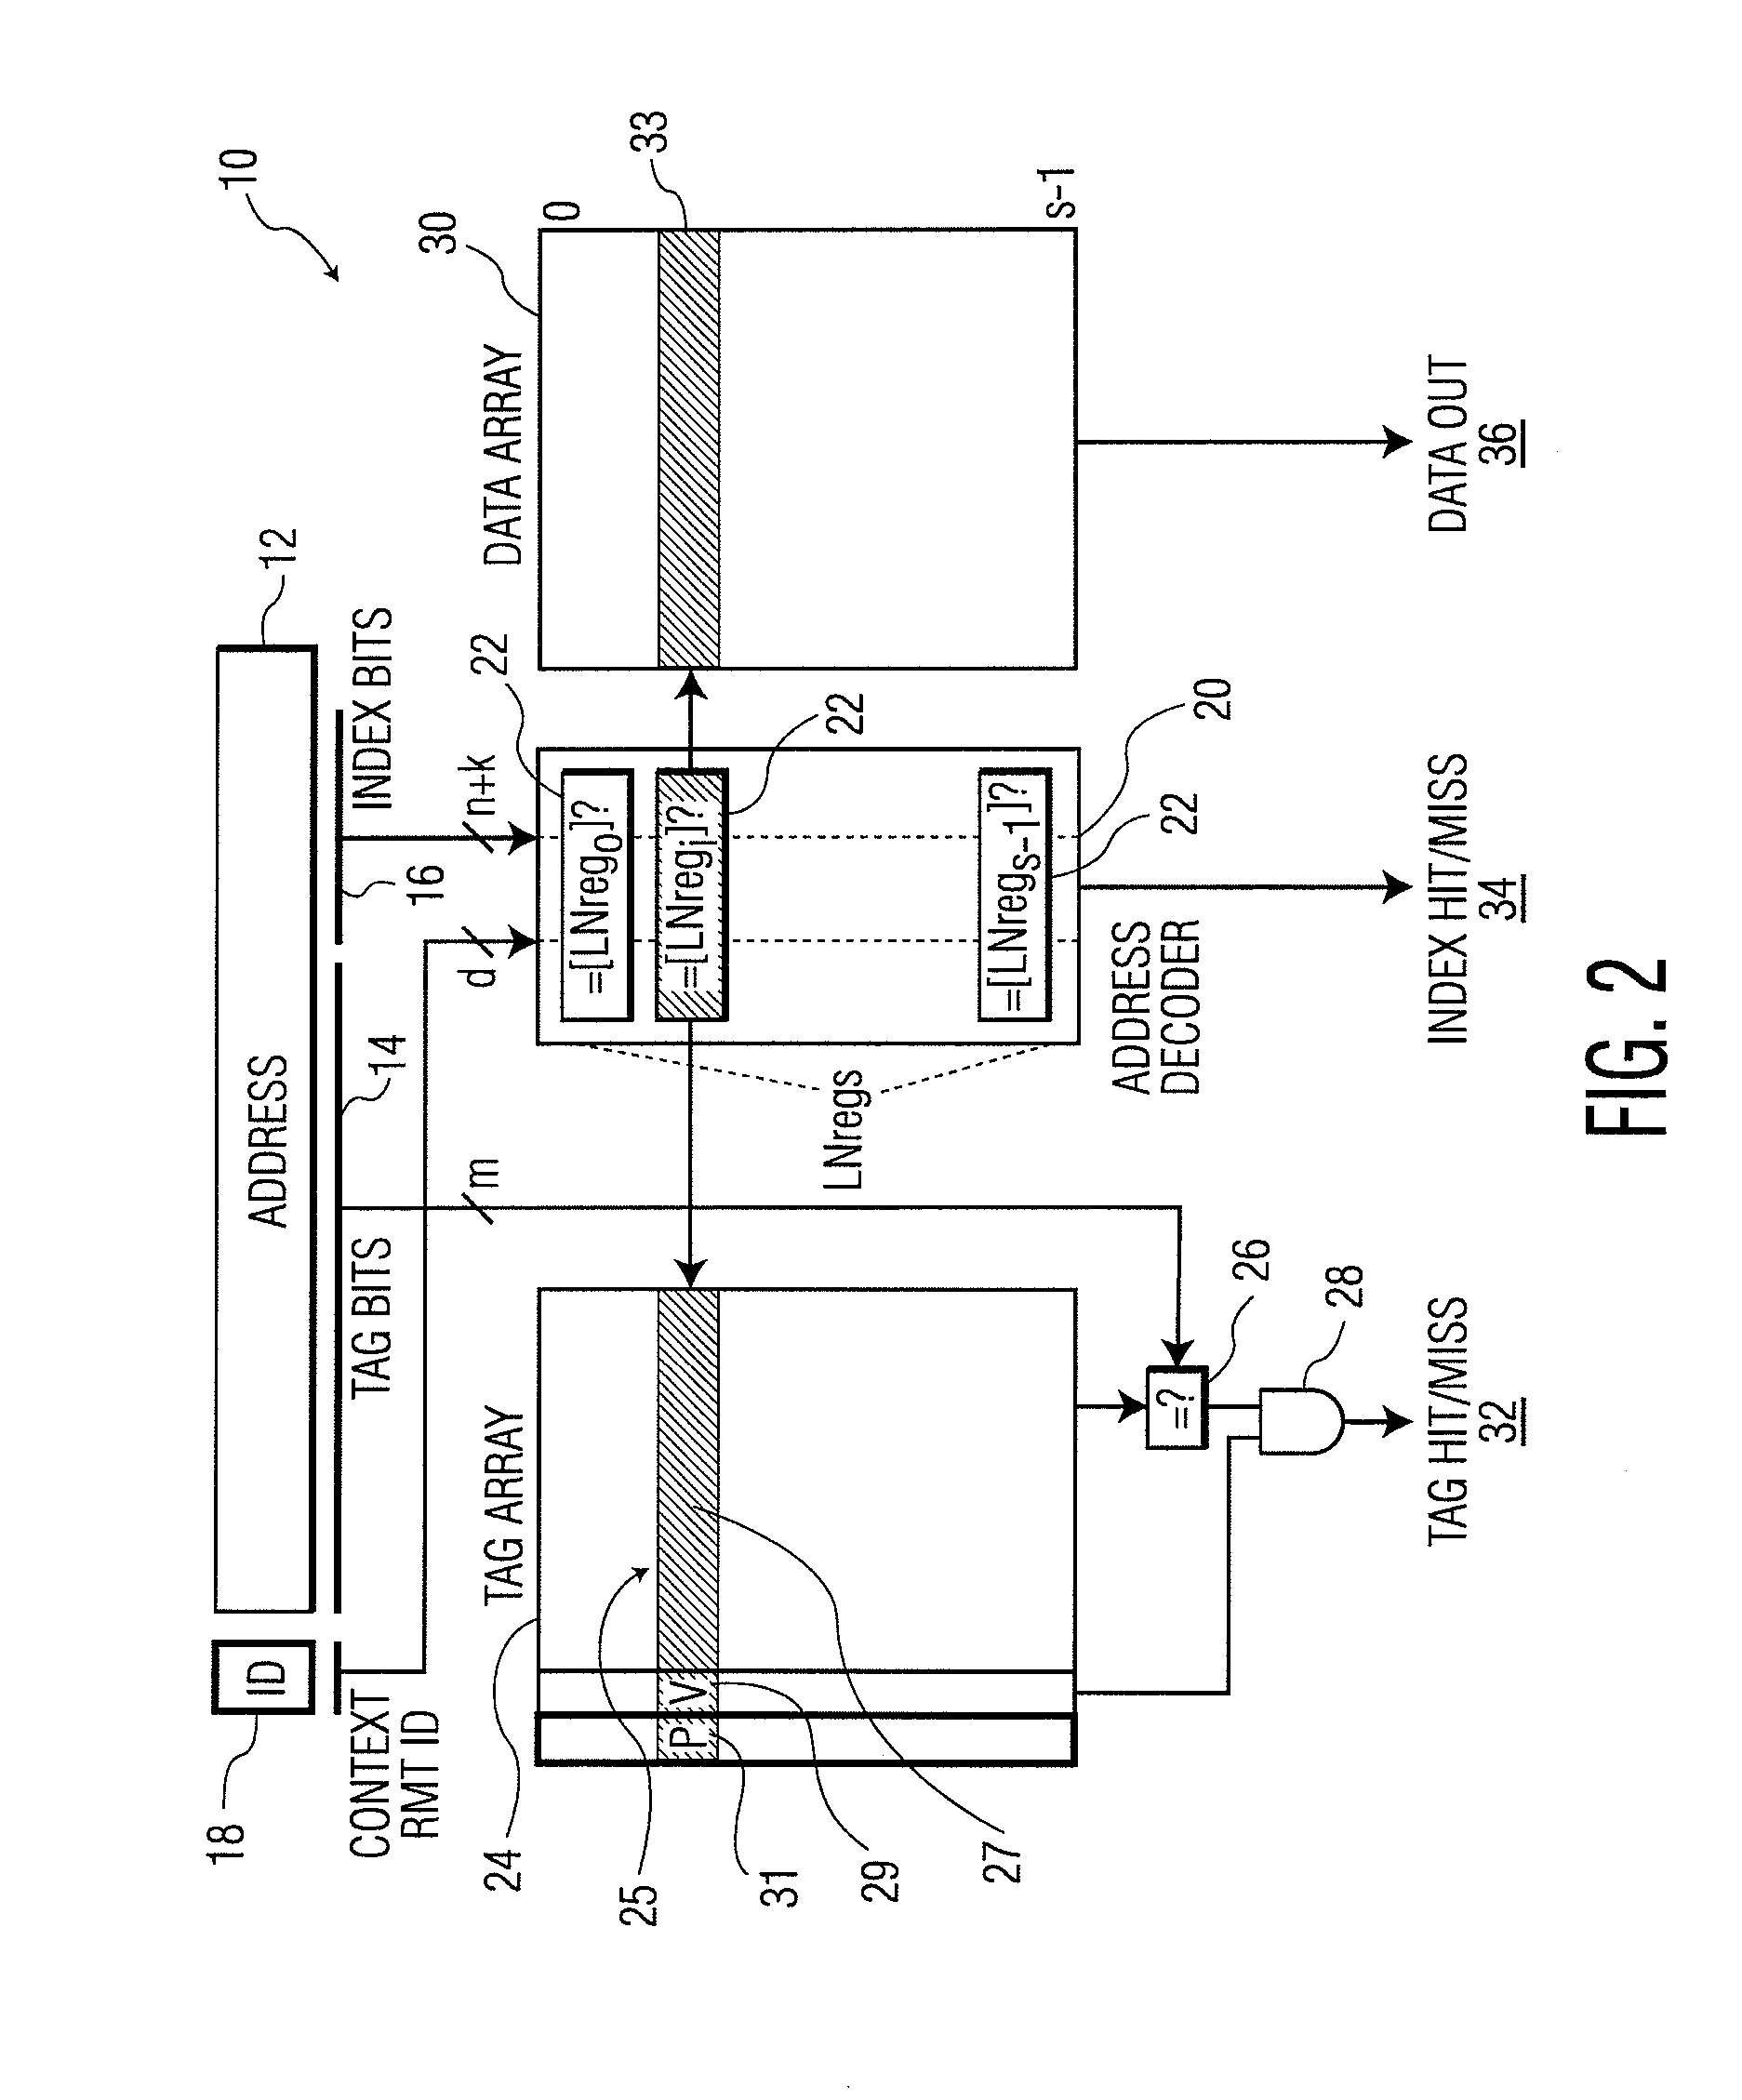 Cache Memory Having Enhanced Performance and Security Features